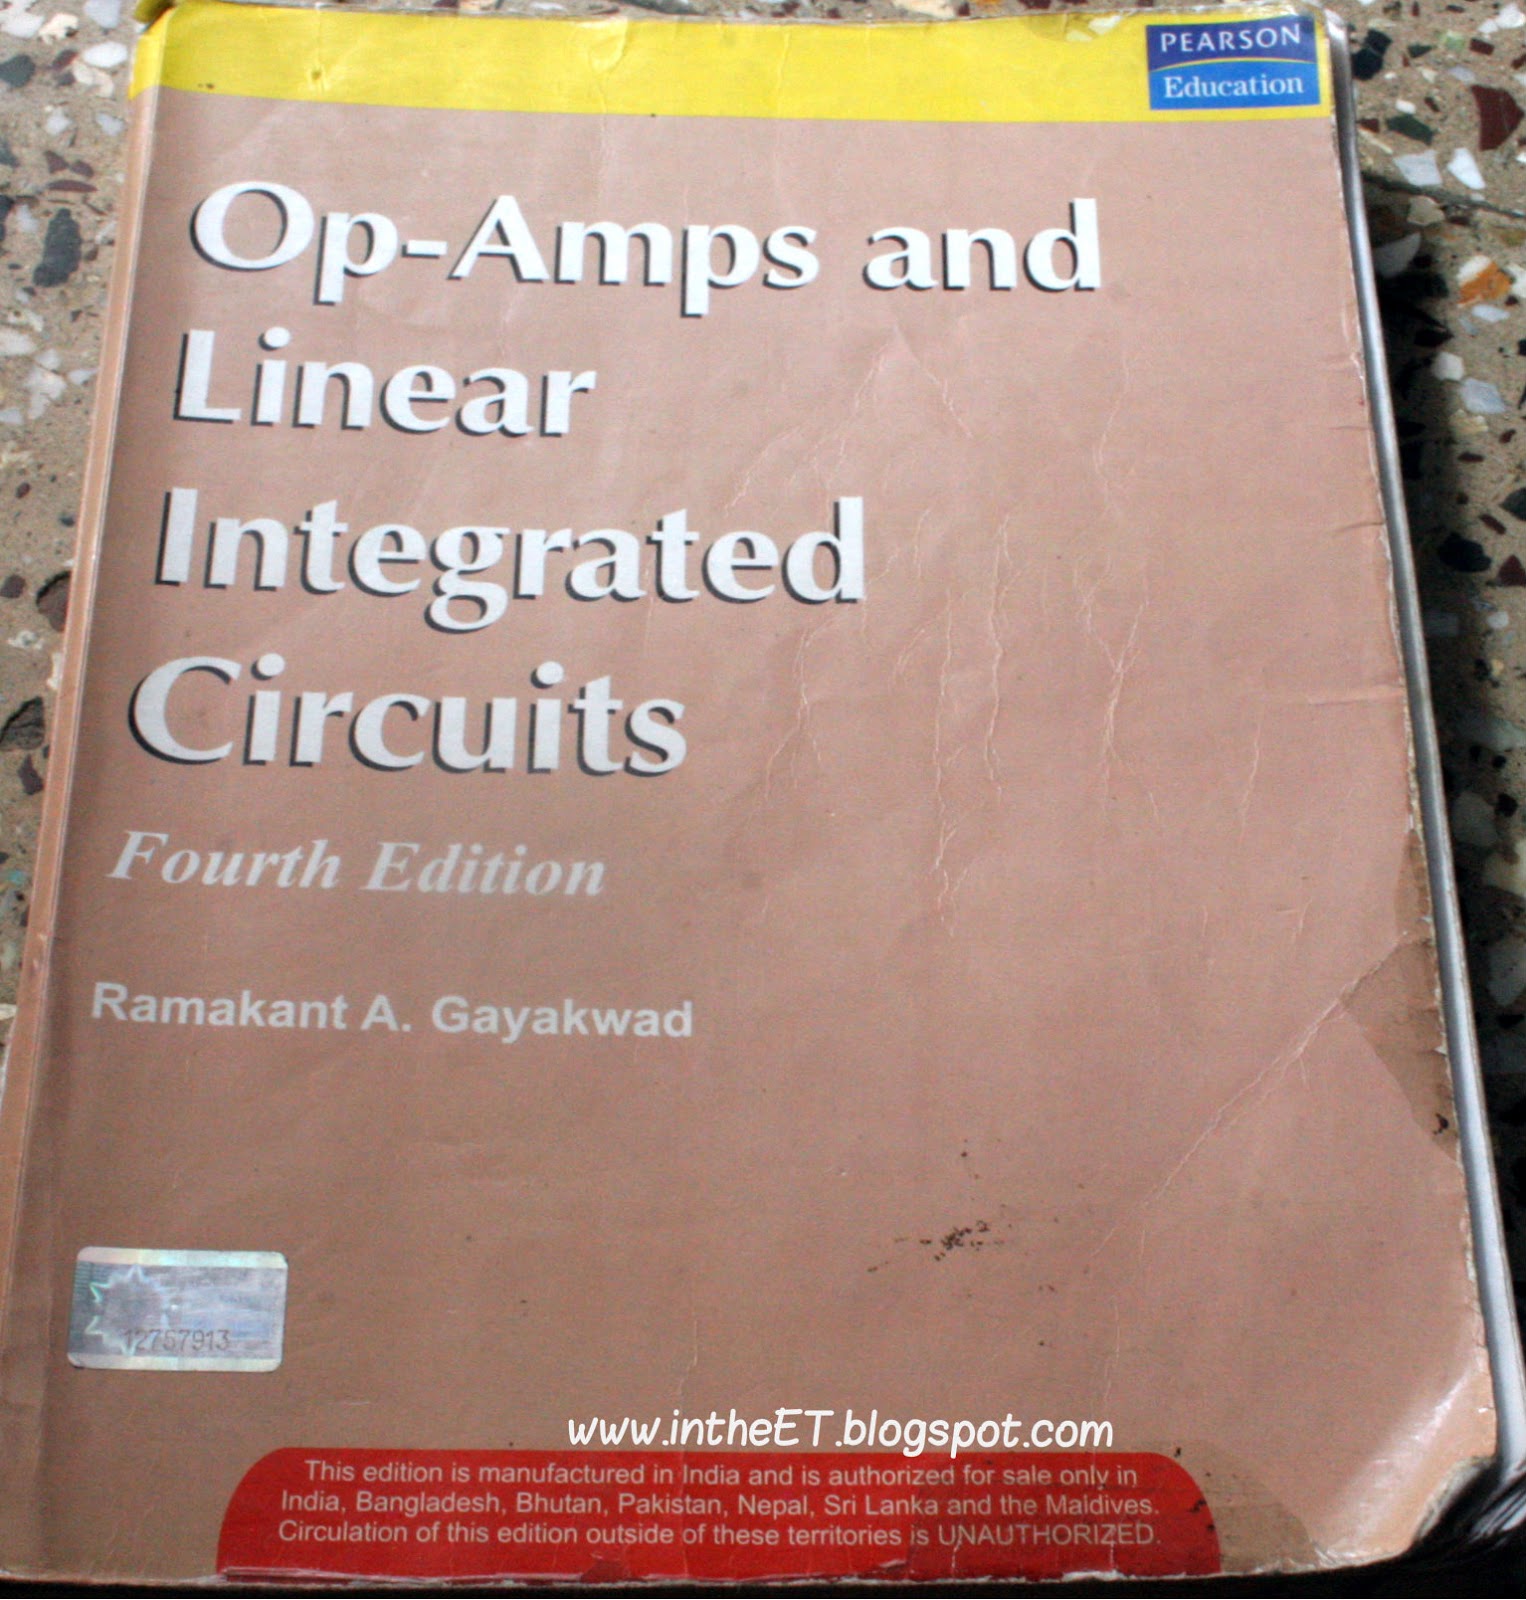 Operational Amplifiers With Linear Integrated Circuits (4th Edition).epub